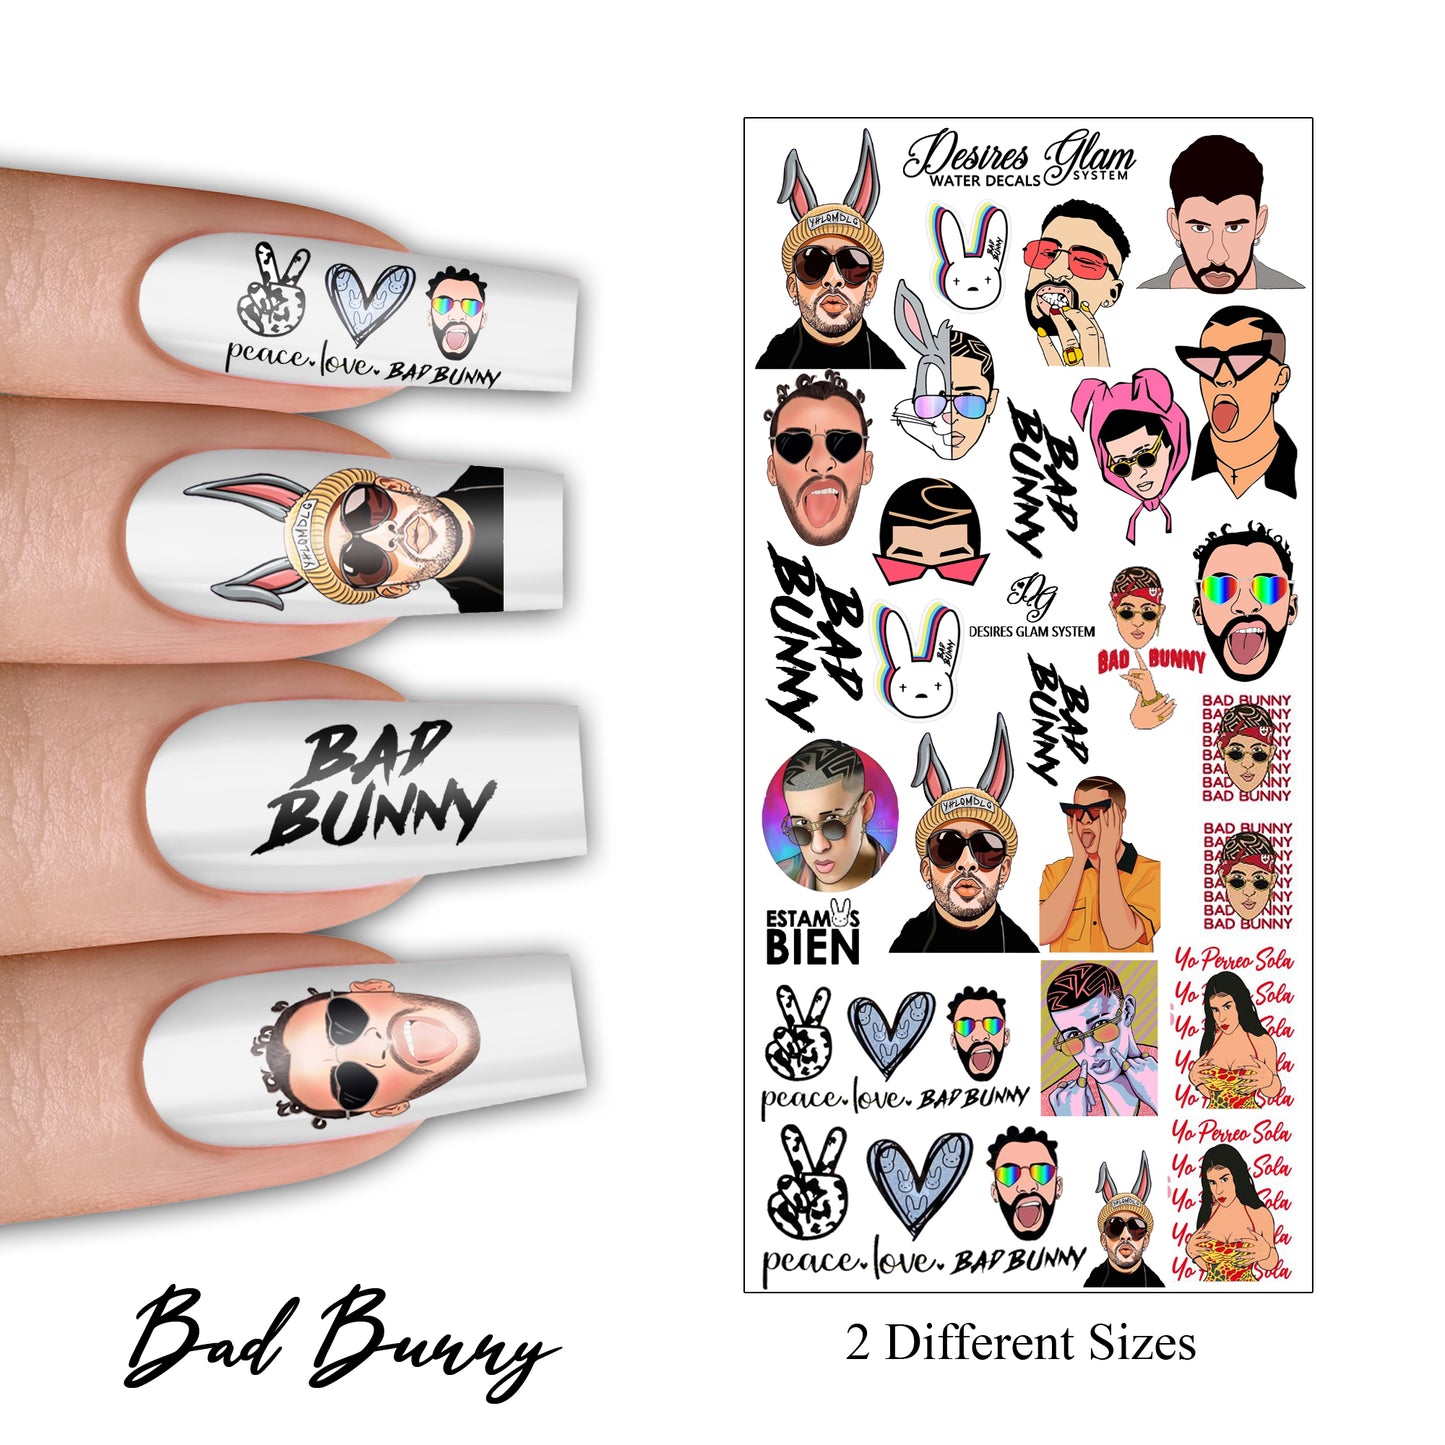 2 Bad Bunny Water decals Small to Med and Large